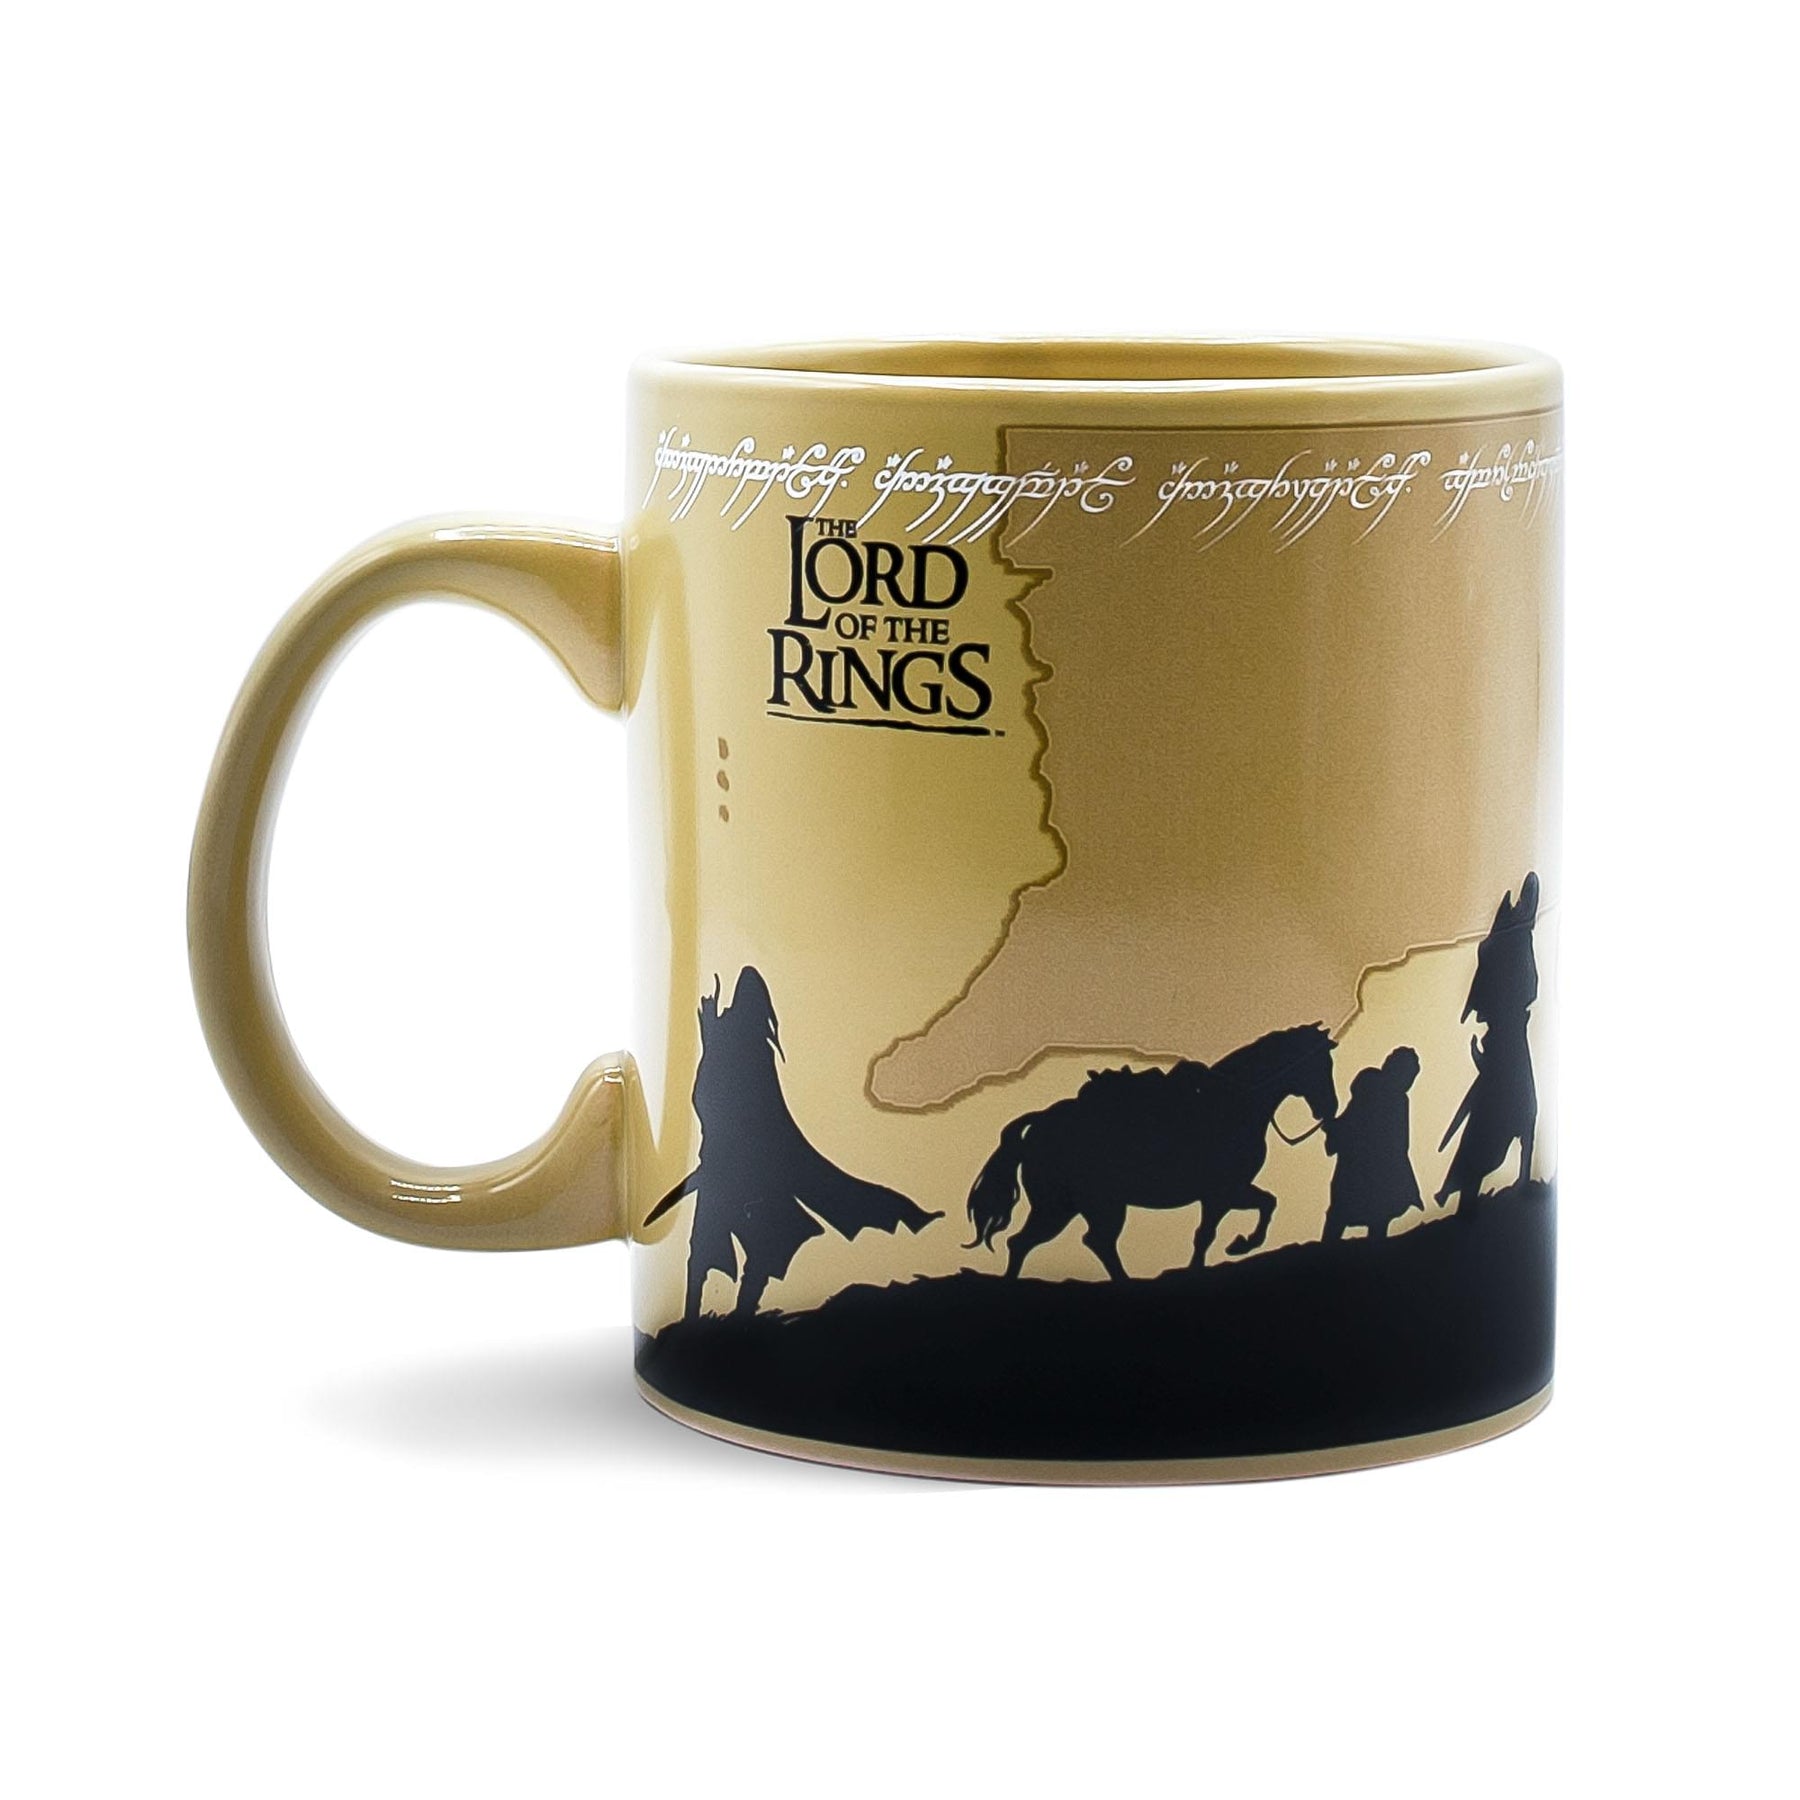 One Ring To Rule Them All Mug Tea Coffee Cup - Book Fantasy Quote Lord Rings